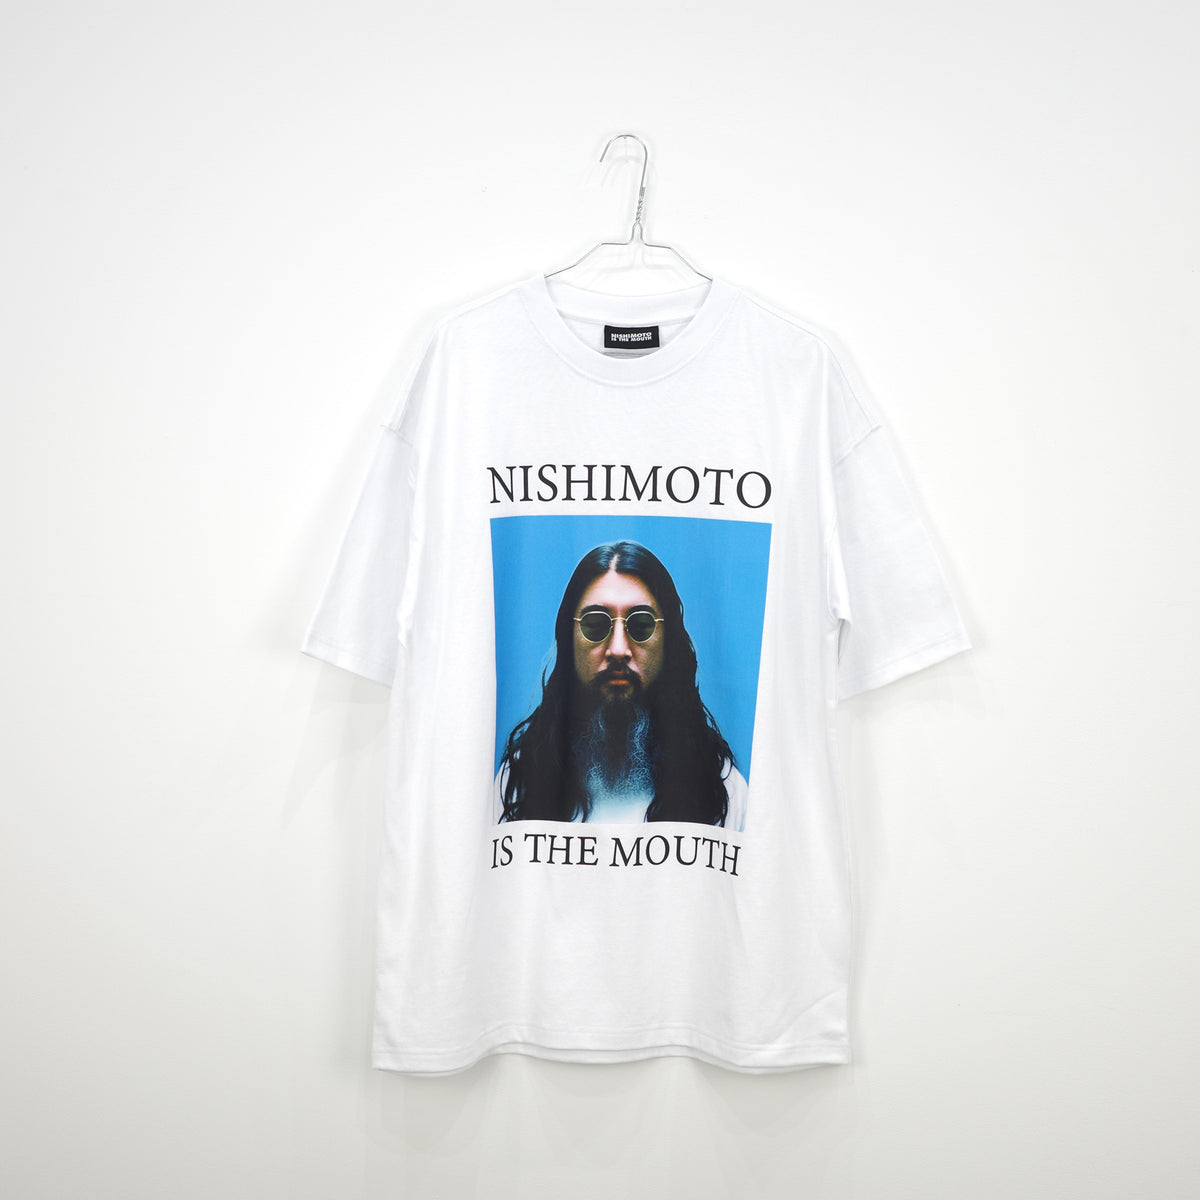 MARCY'S×NISHIMOTO IS THE MOUTH Tシャツ XL - ファッション